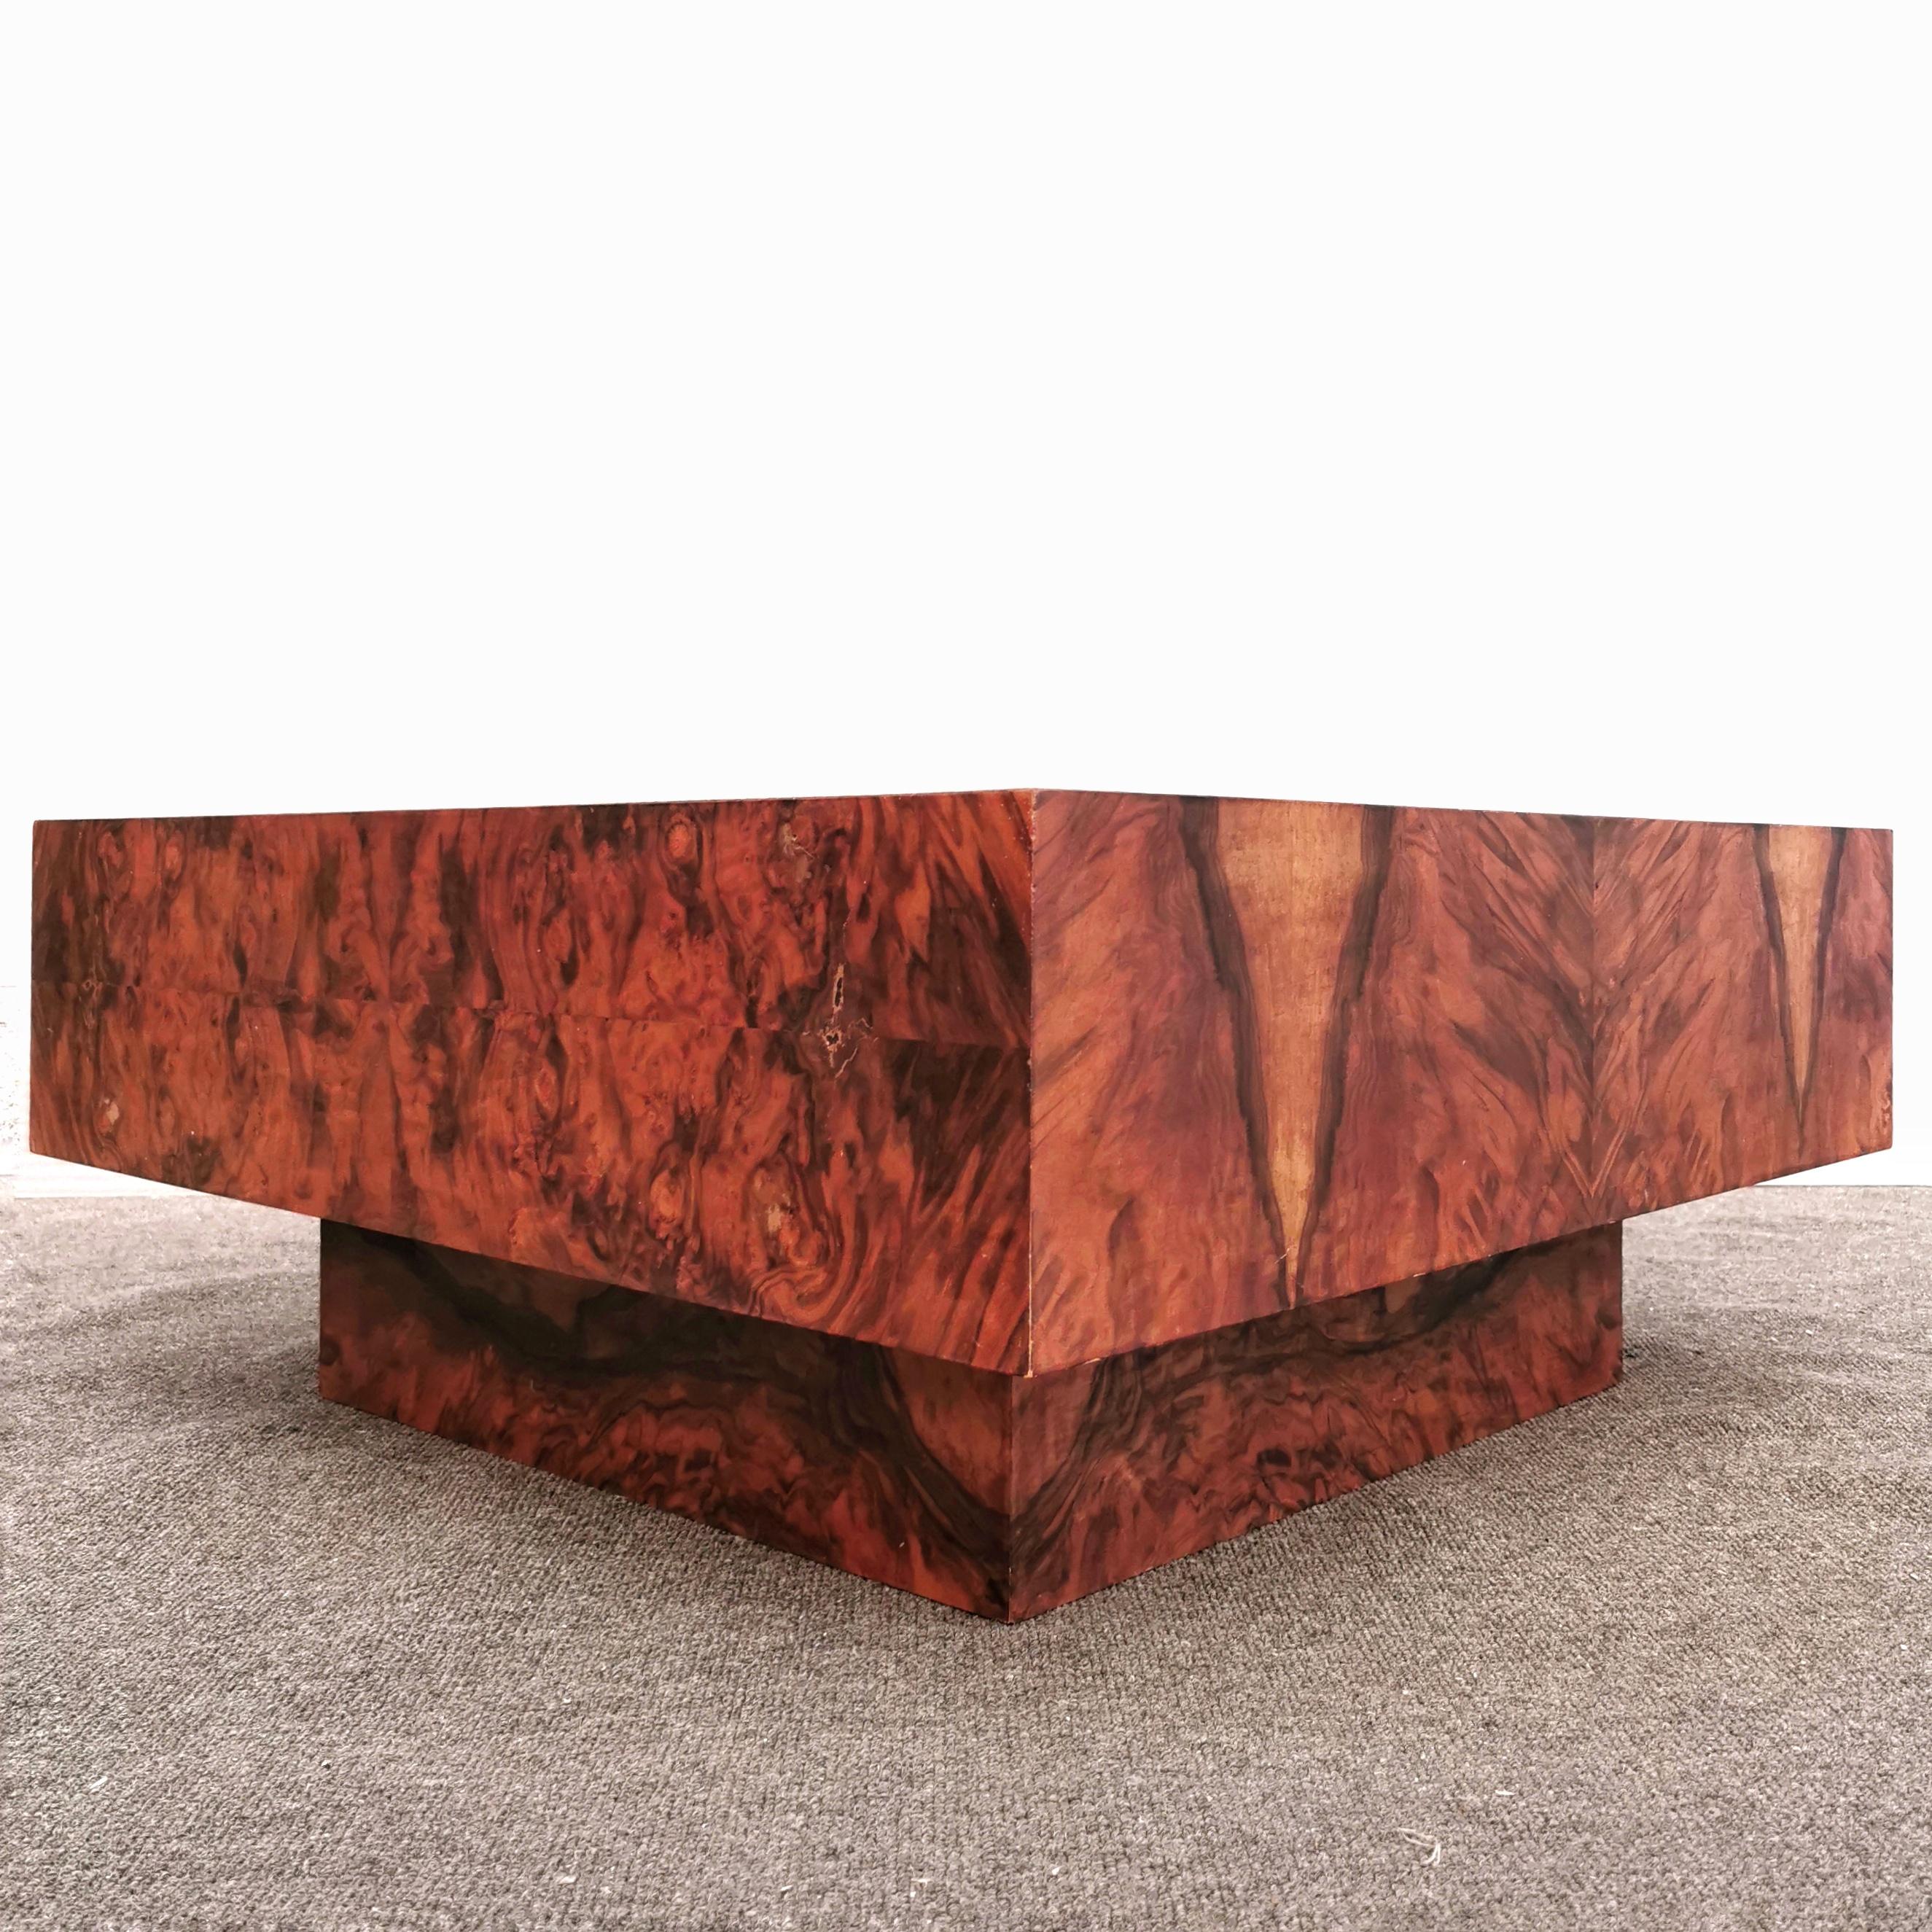 Rectangular living room coffee table covered in vintage 1960s briarwood In Good Condition For Sale In Milano, MI